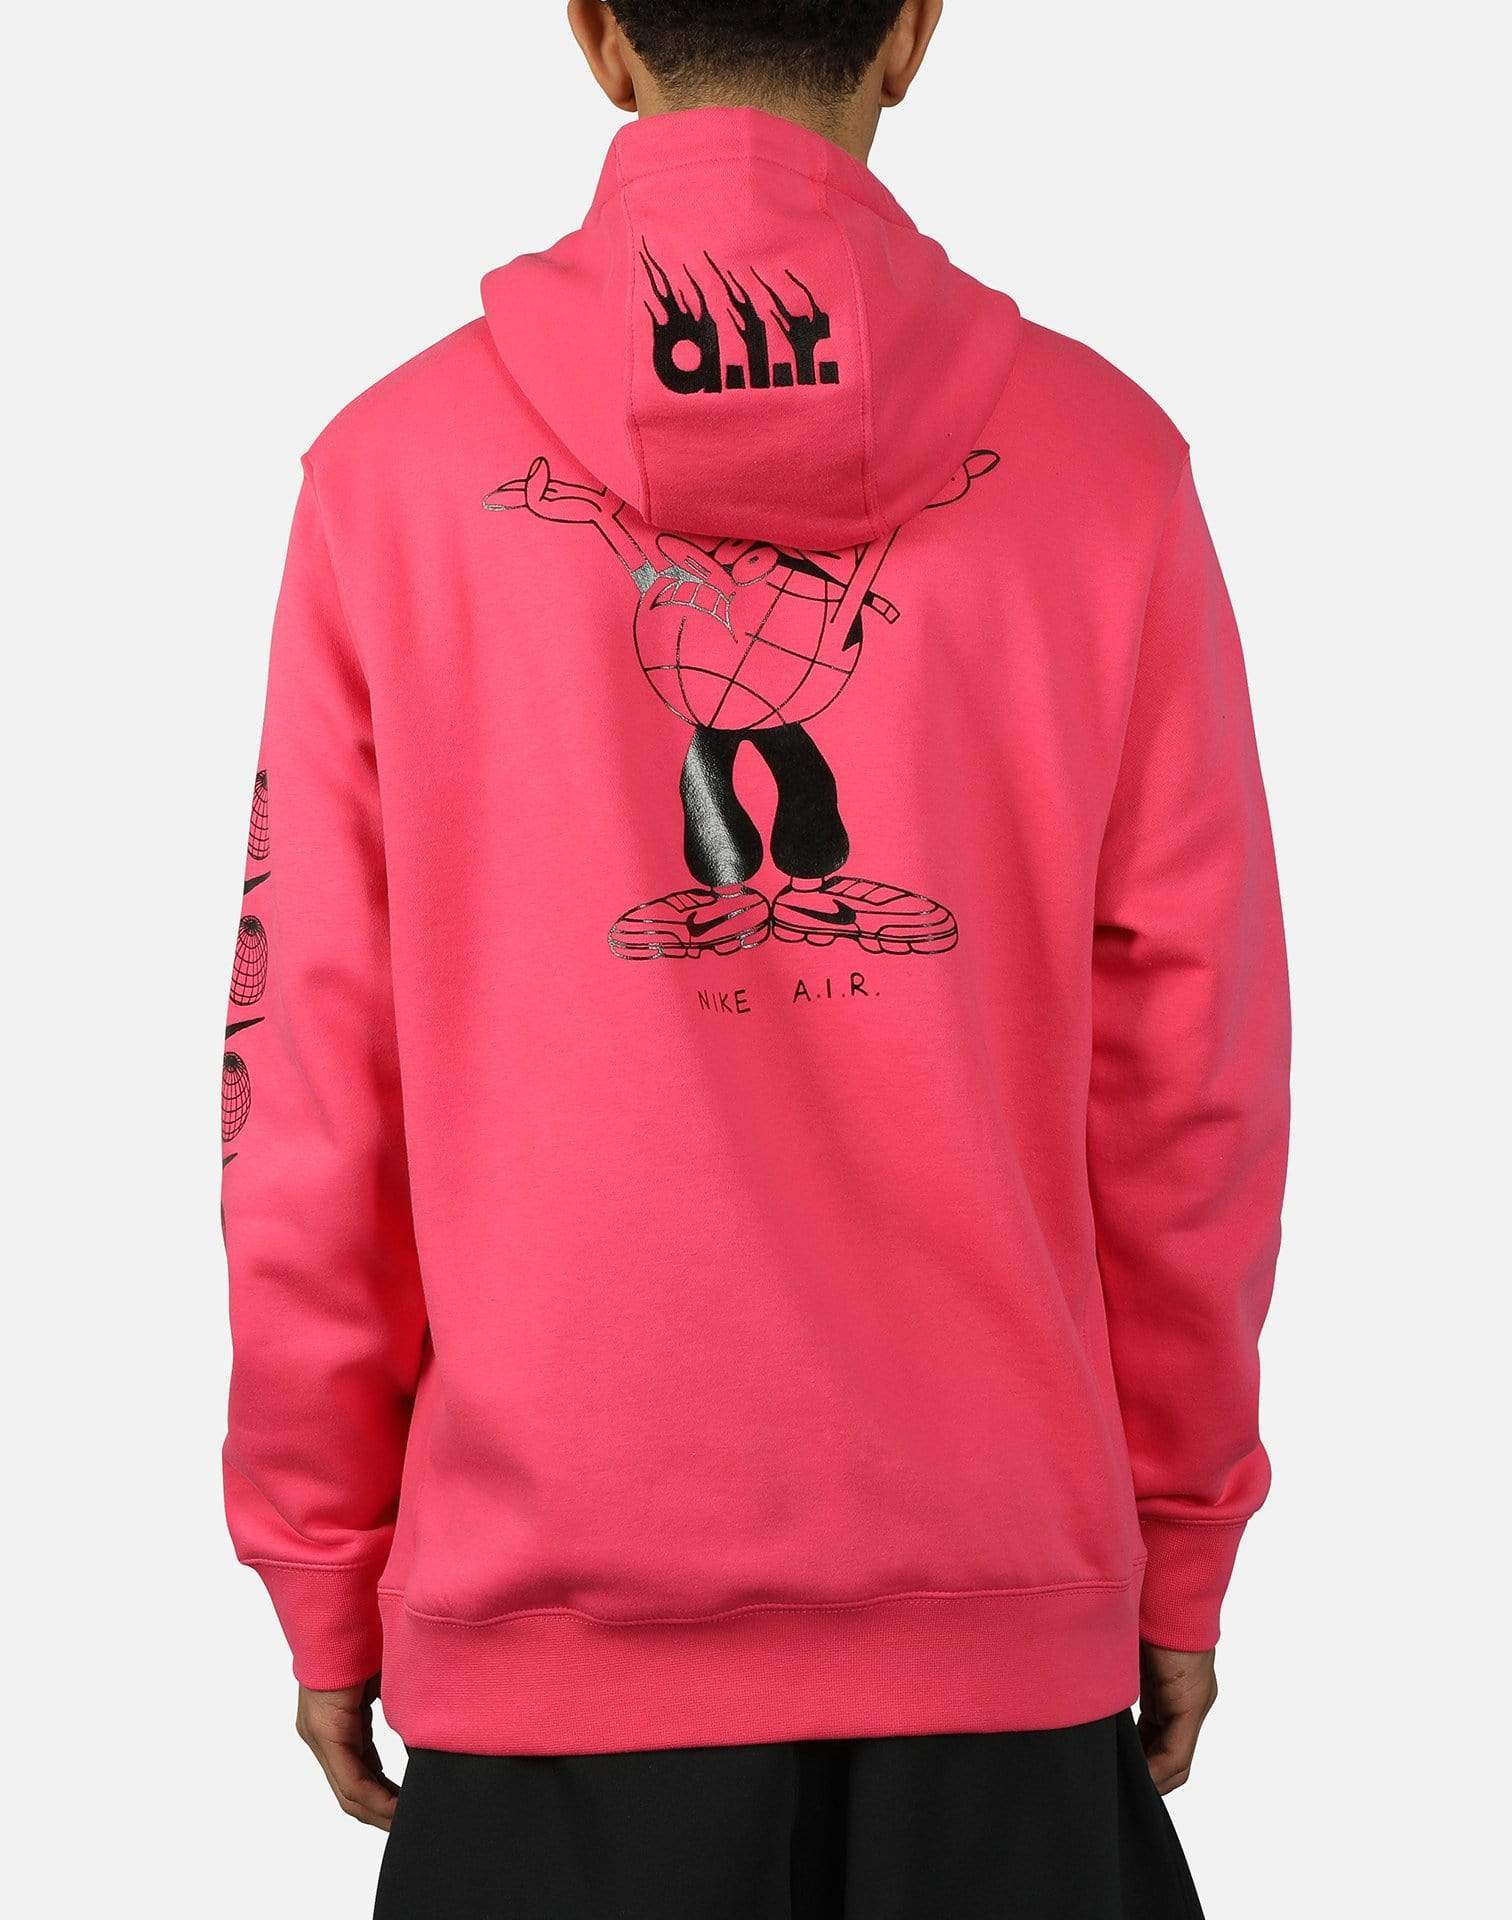 NSW LUGOSIS PULLOVER HOODIE – DTLR